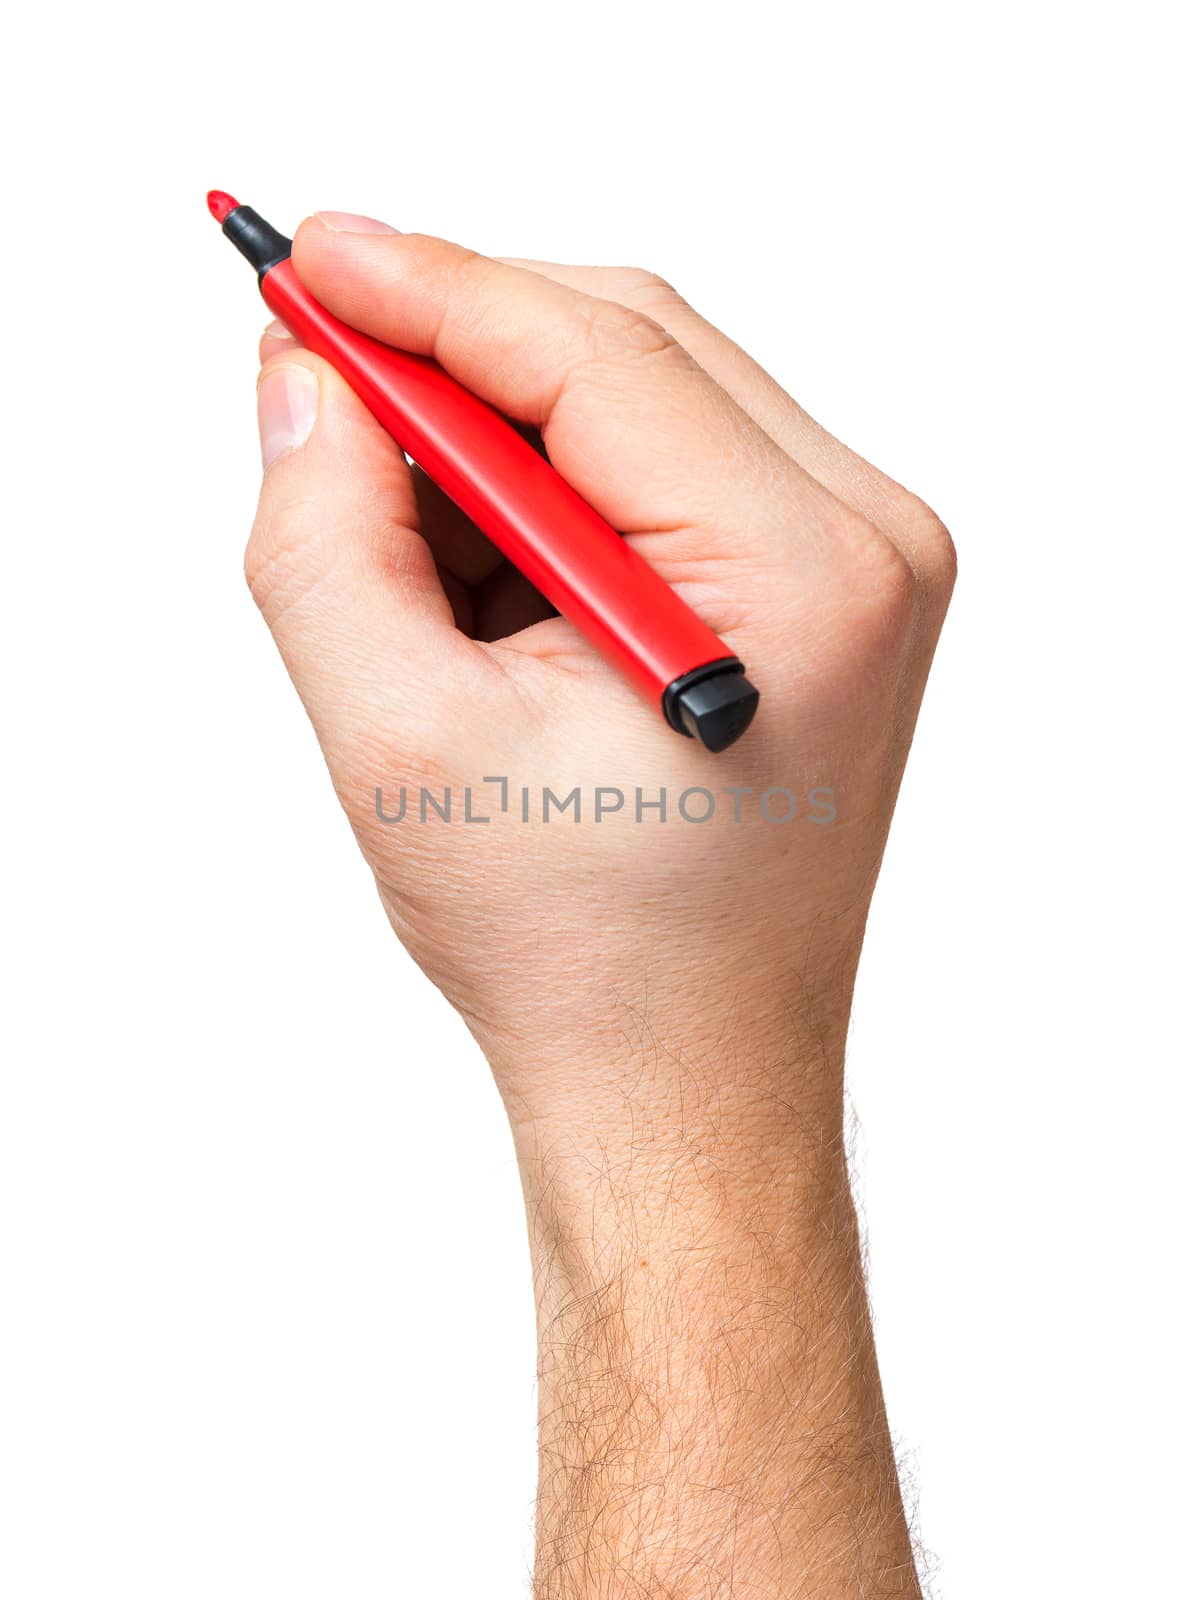 Male hand holding red marker, isolated on white background.